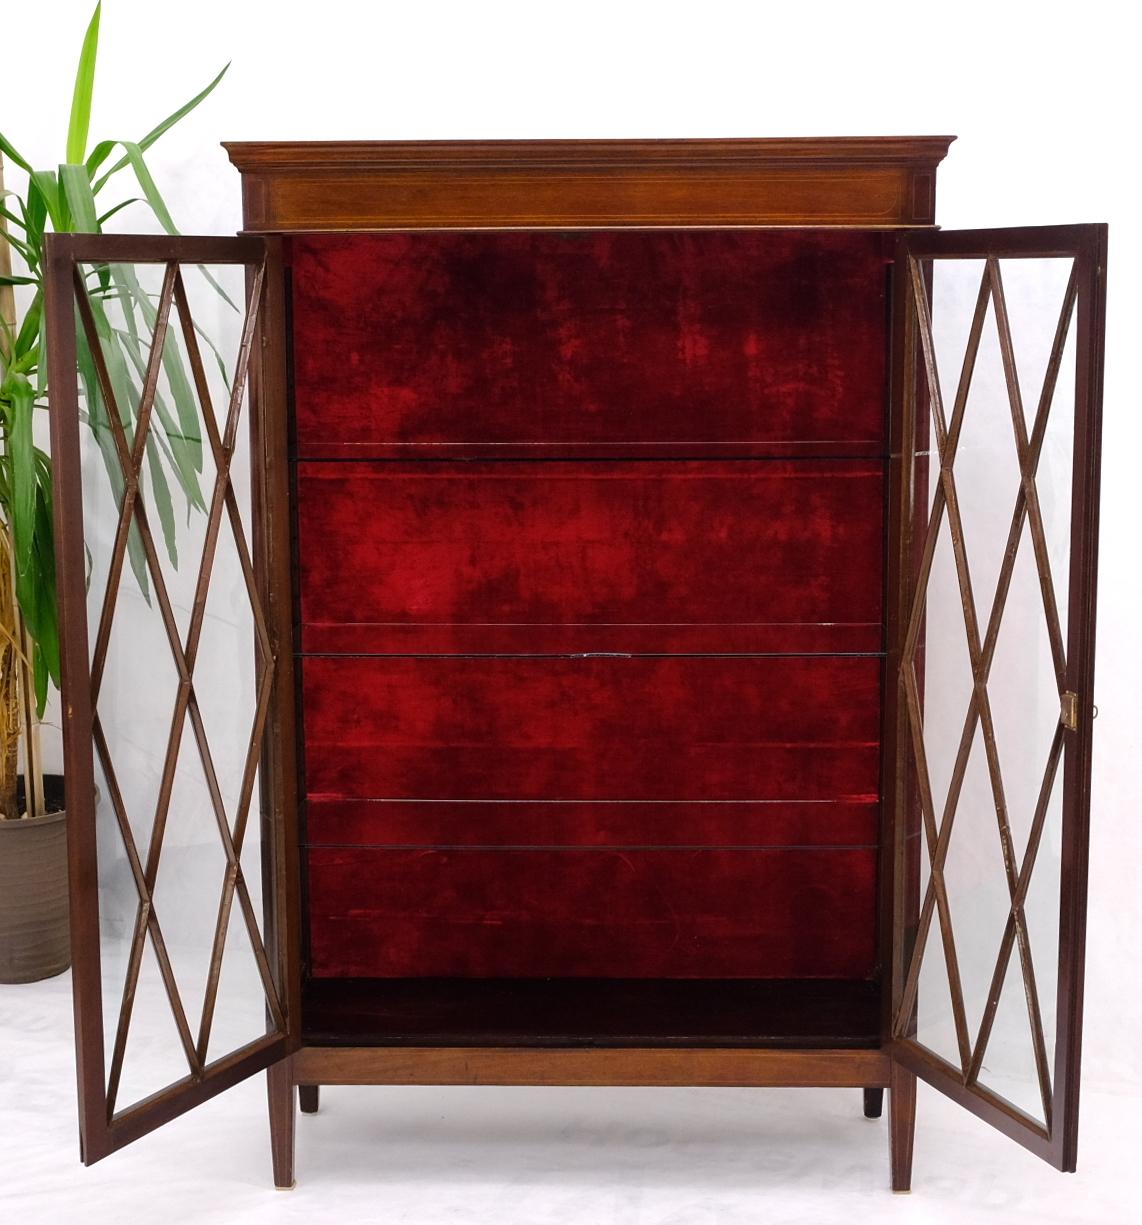 20th Century Individual Glass Pane Double Doors Pencil Inlay Flame Mahogany Show Case For Sale